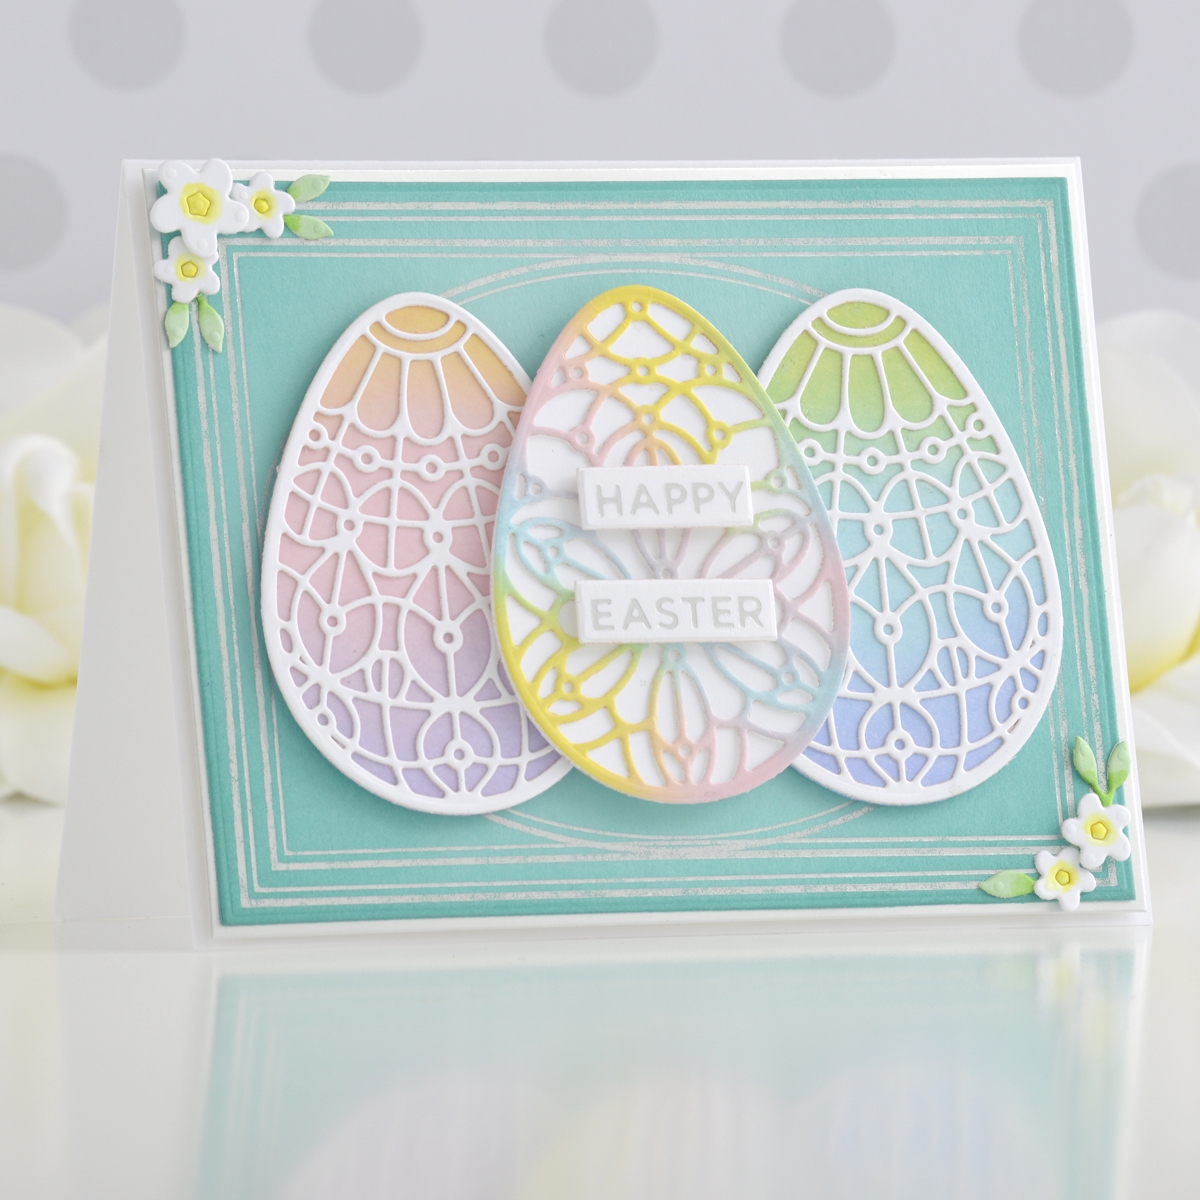 Easy & Elegant Cards With The Glimmer Hot Foil System – Annie Williams